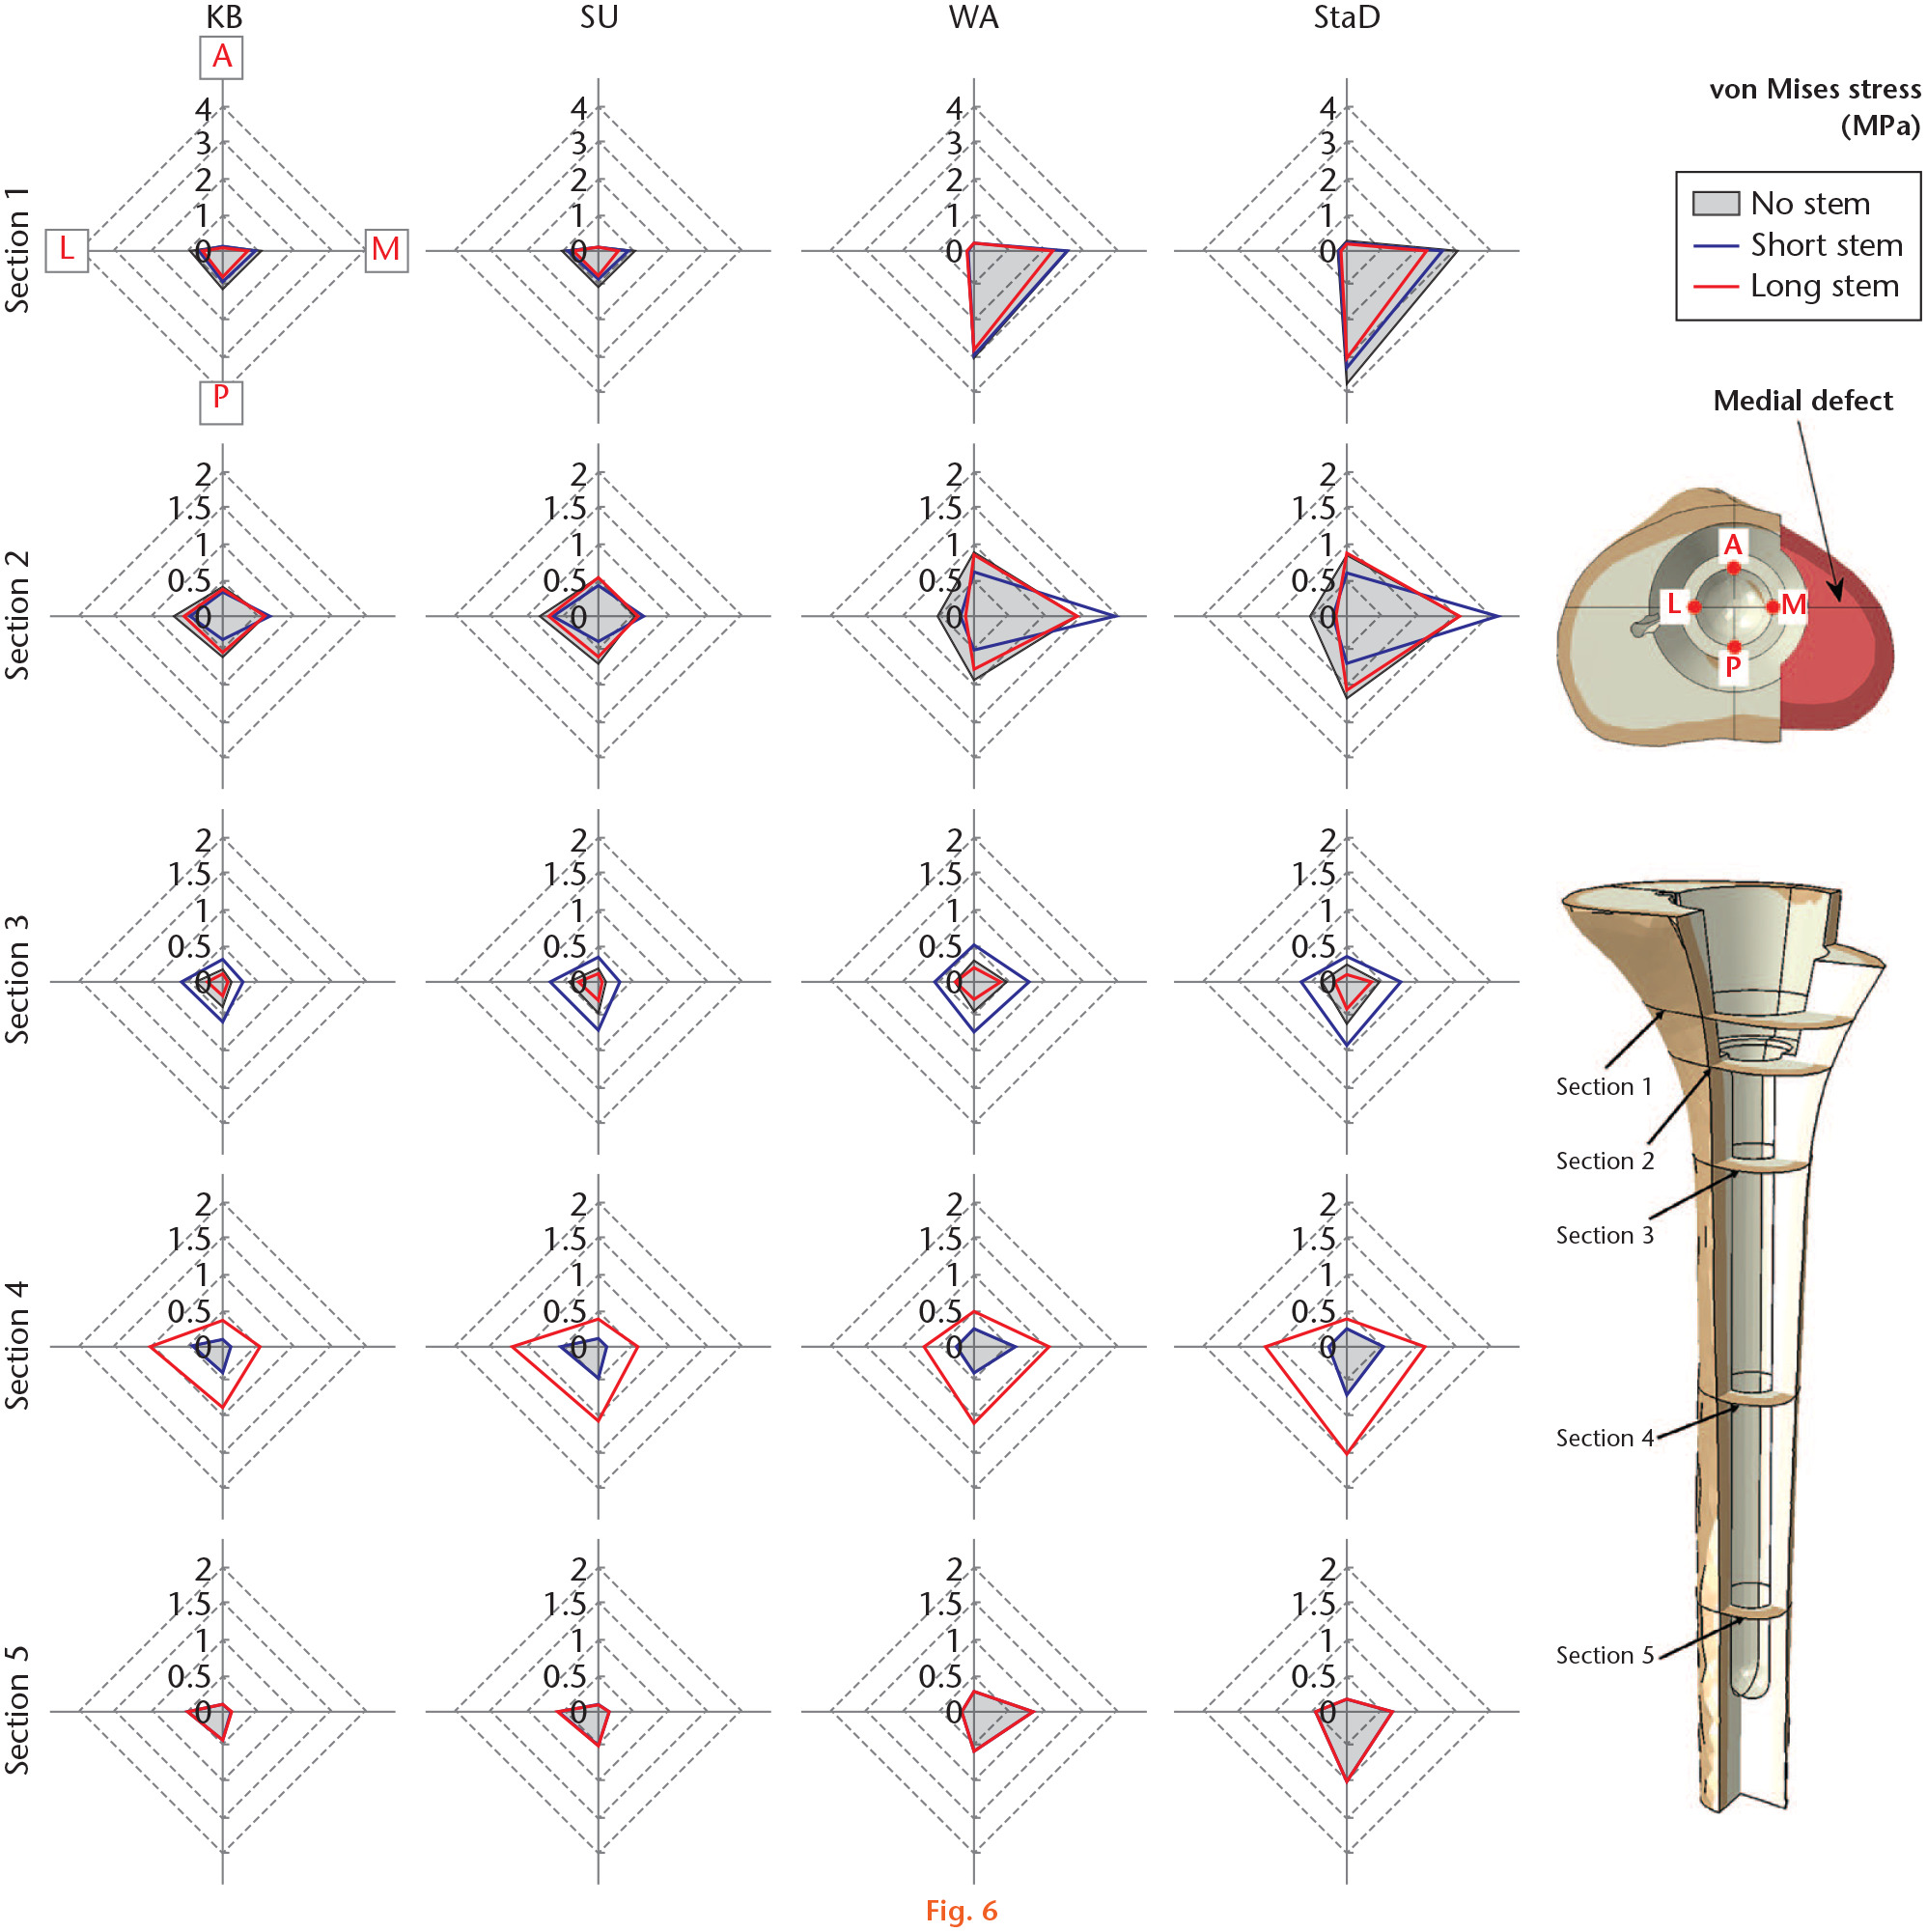 Fig. 6 
            von Mises stress of medial defected bone from four anatomical points (anterior: A, lateral: L, medial: M, and posterior: P) when the cone was used for revision total knee arthroplasty with no stem, a short stem, or a long stem. Four loading scenarios were considered: knee bend (KB), standing up (SU), walking (WA), and stairs descending (StaD).
          